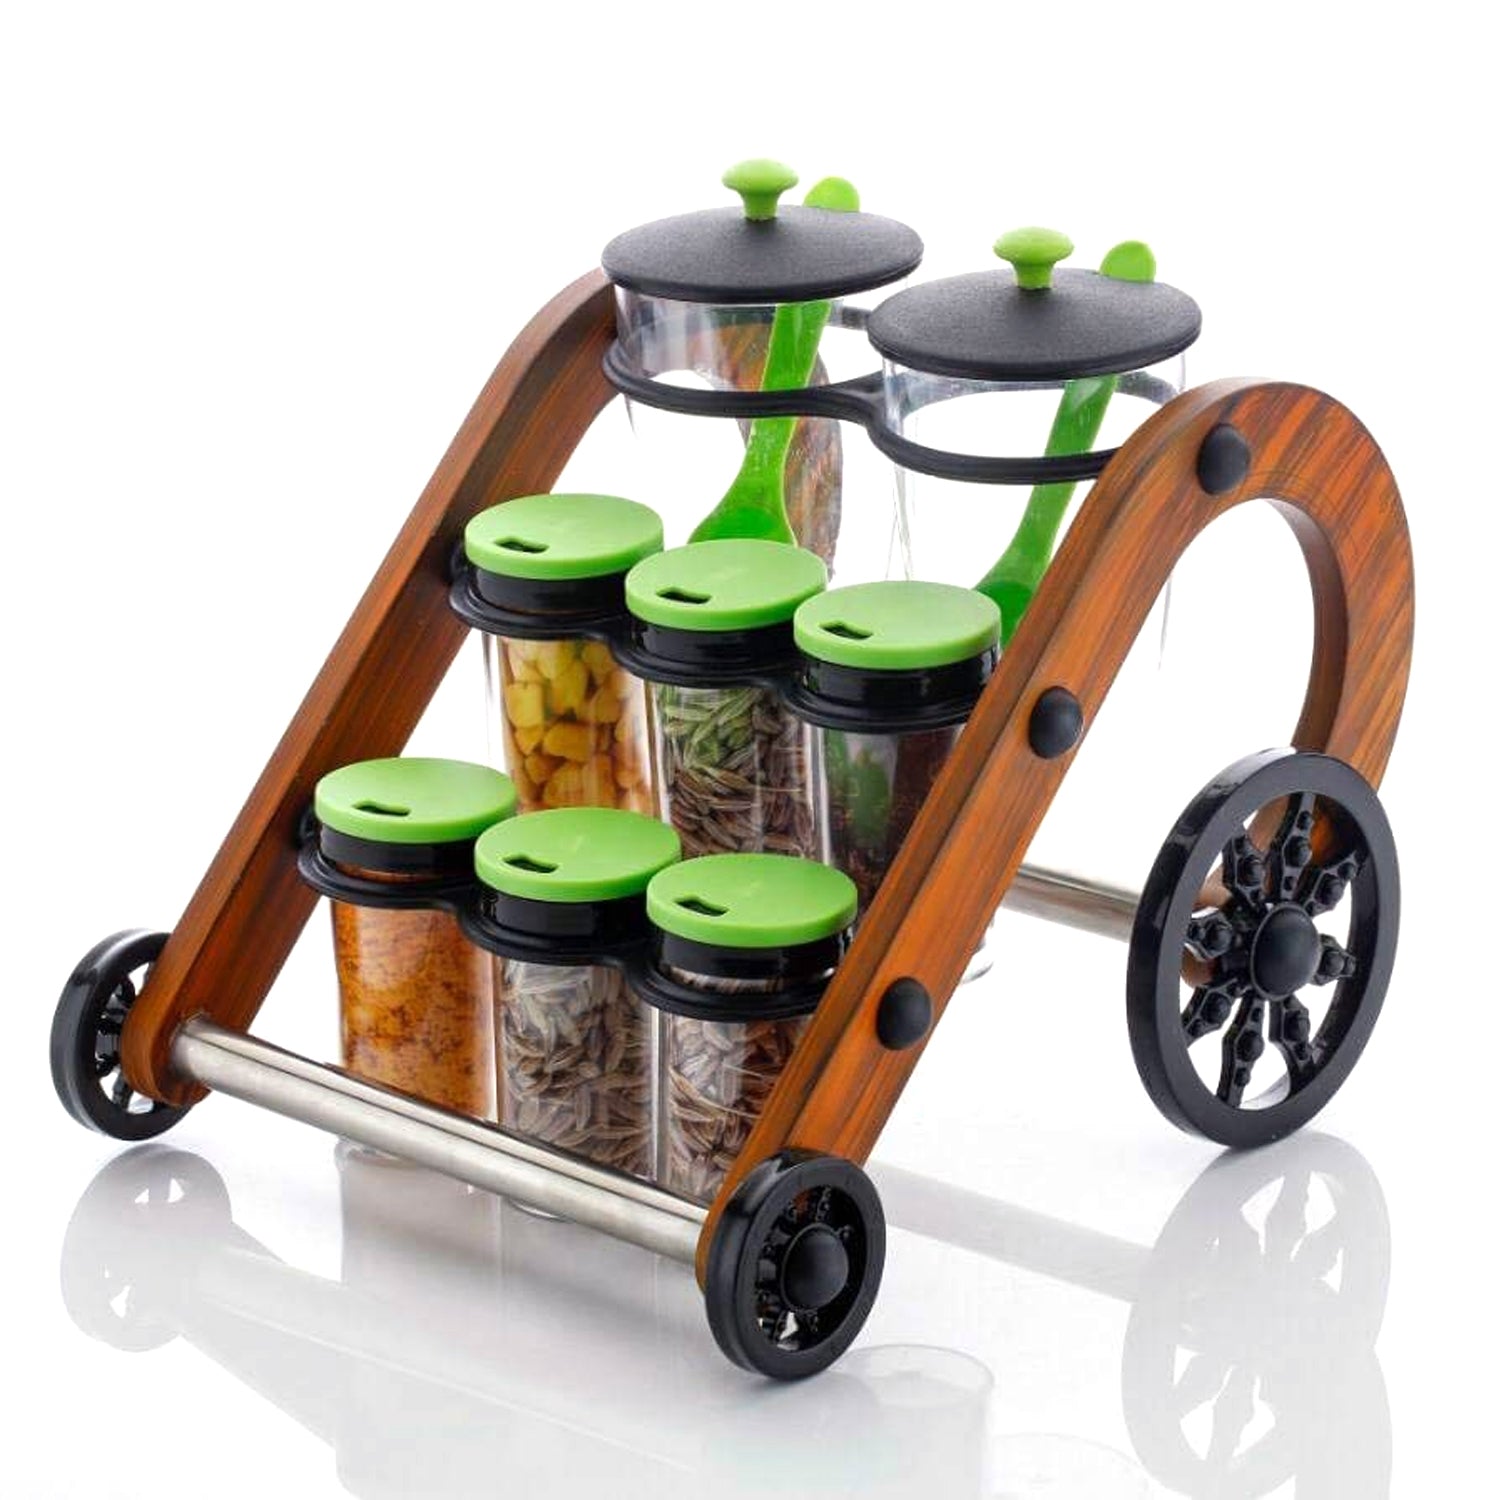 2677 Rajwadi Spice Jar Stand and holder for supporting jars, bottles etc. including all kitchen purposes.